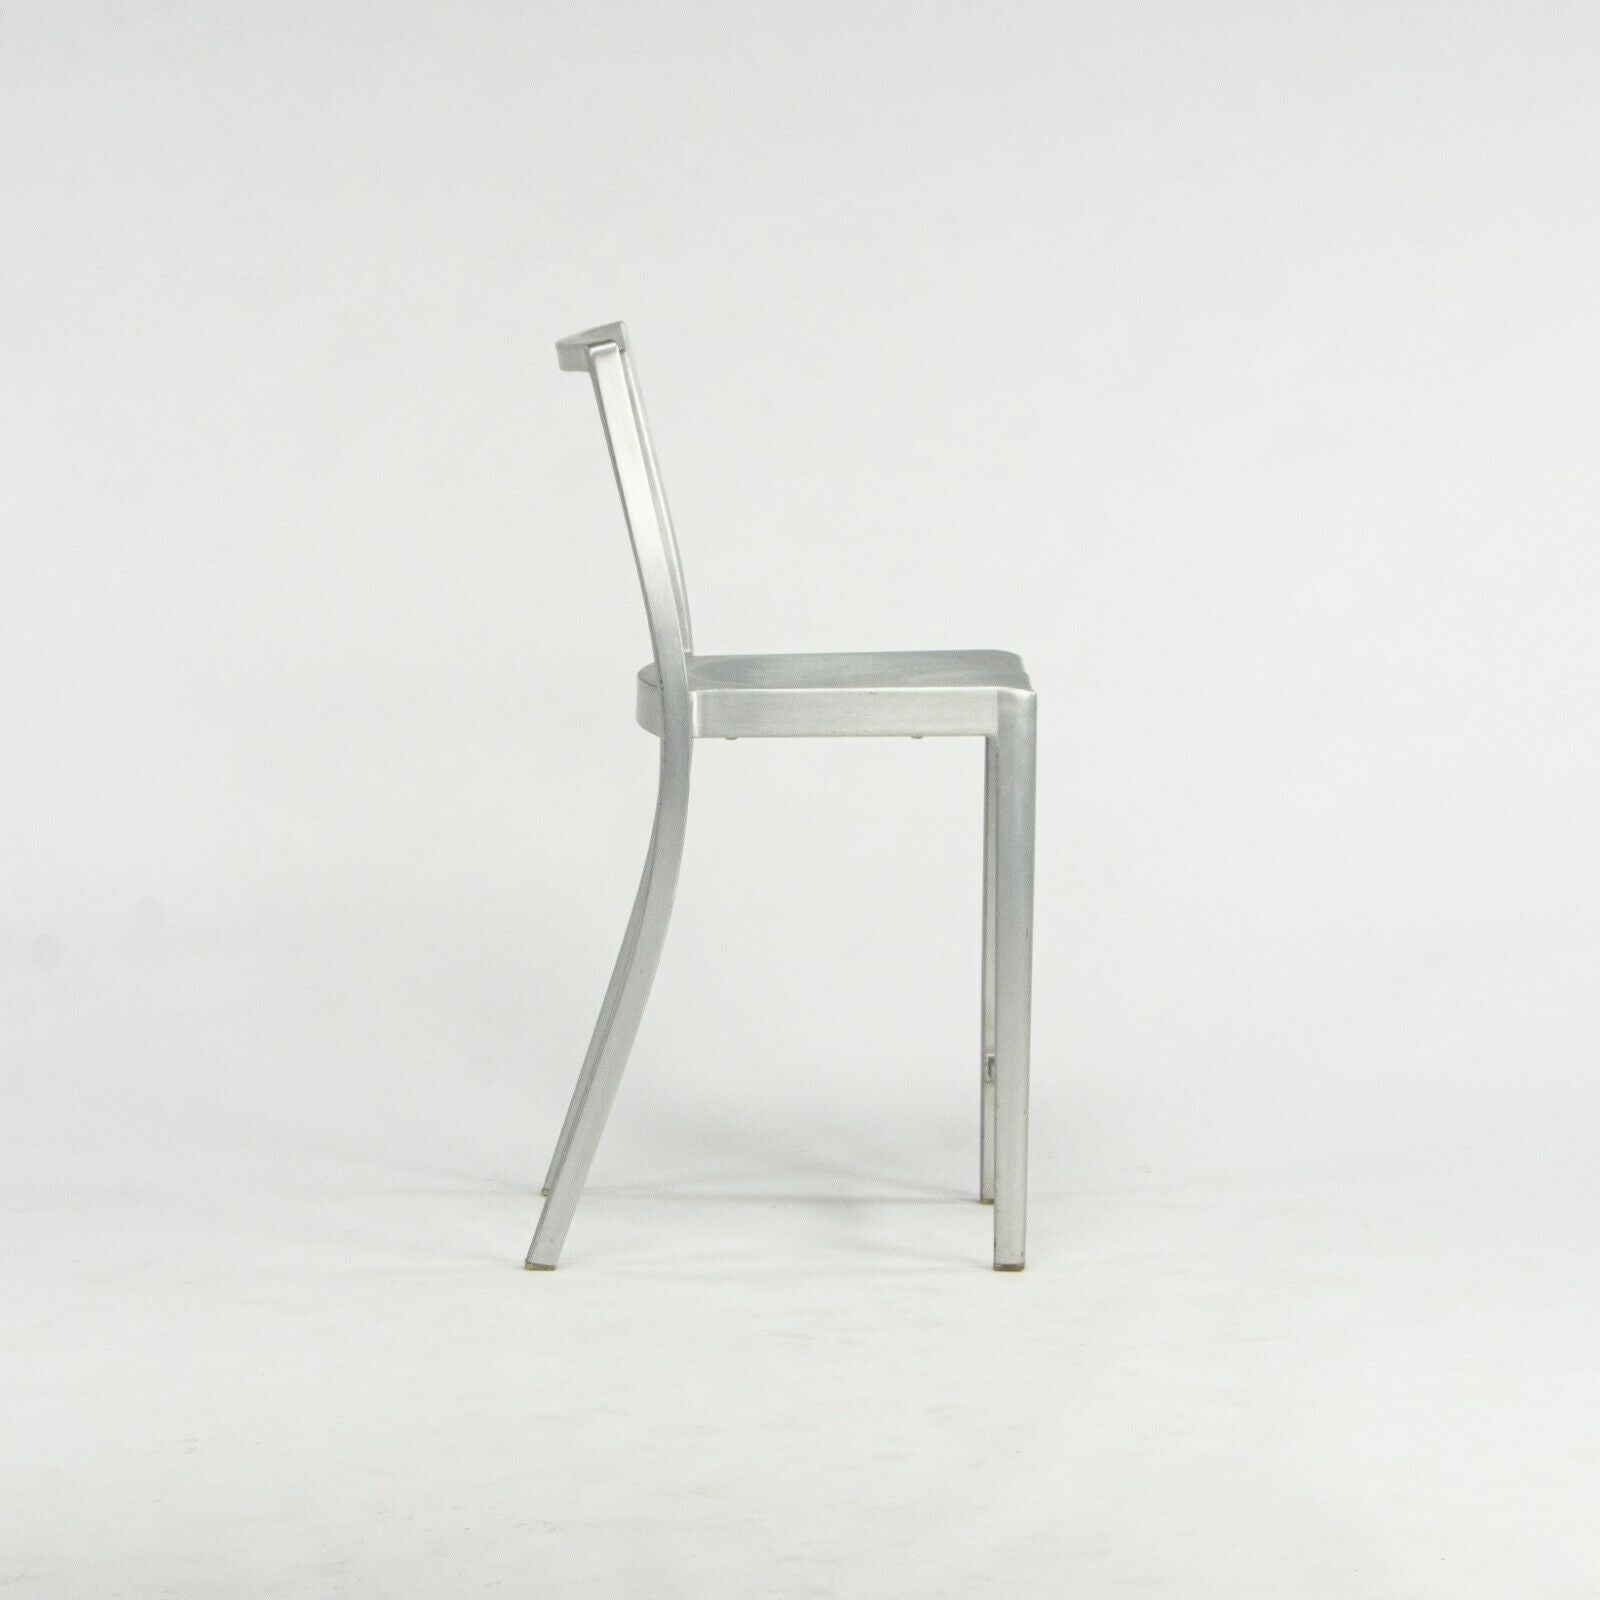 SOLD 2009 Pair of Emeco Icon Counter Stools by Philippe Starck in Brushed Aluminum